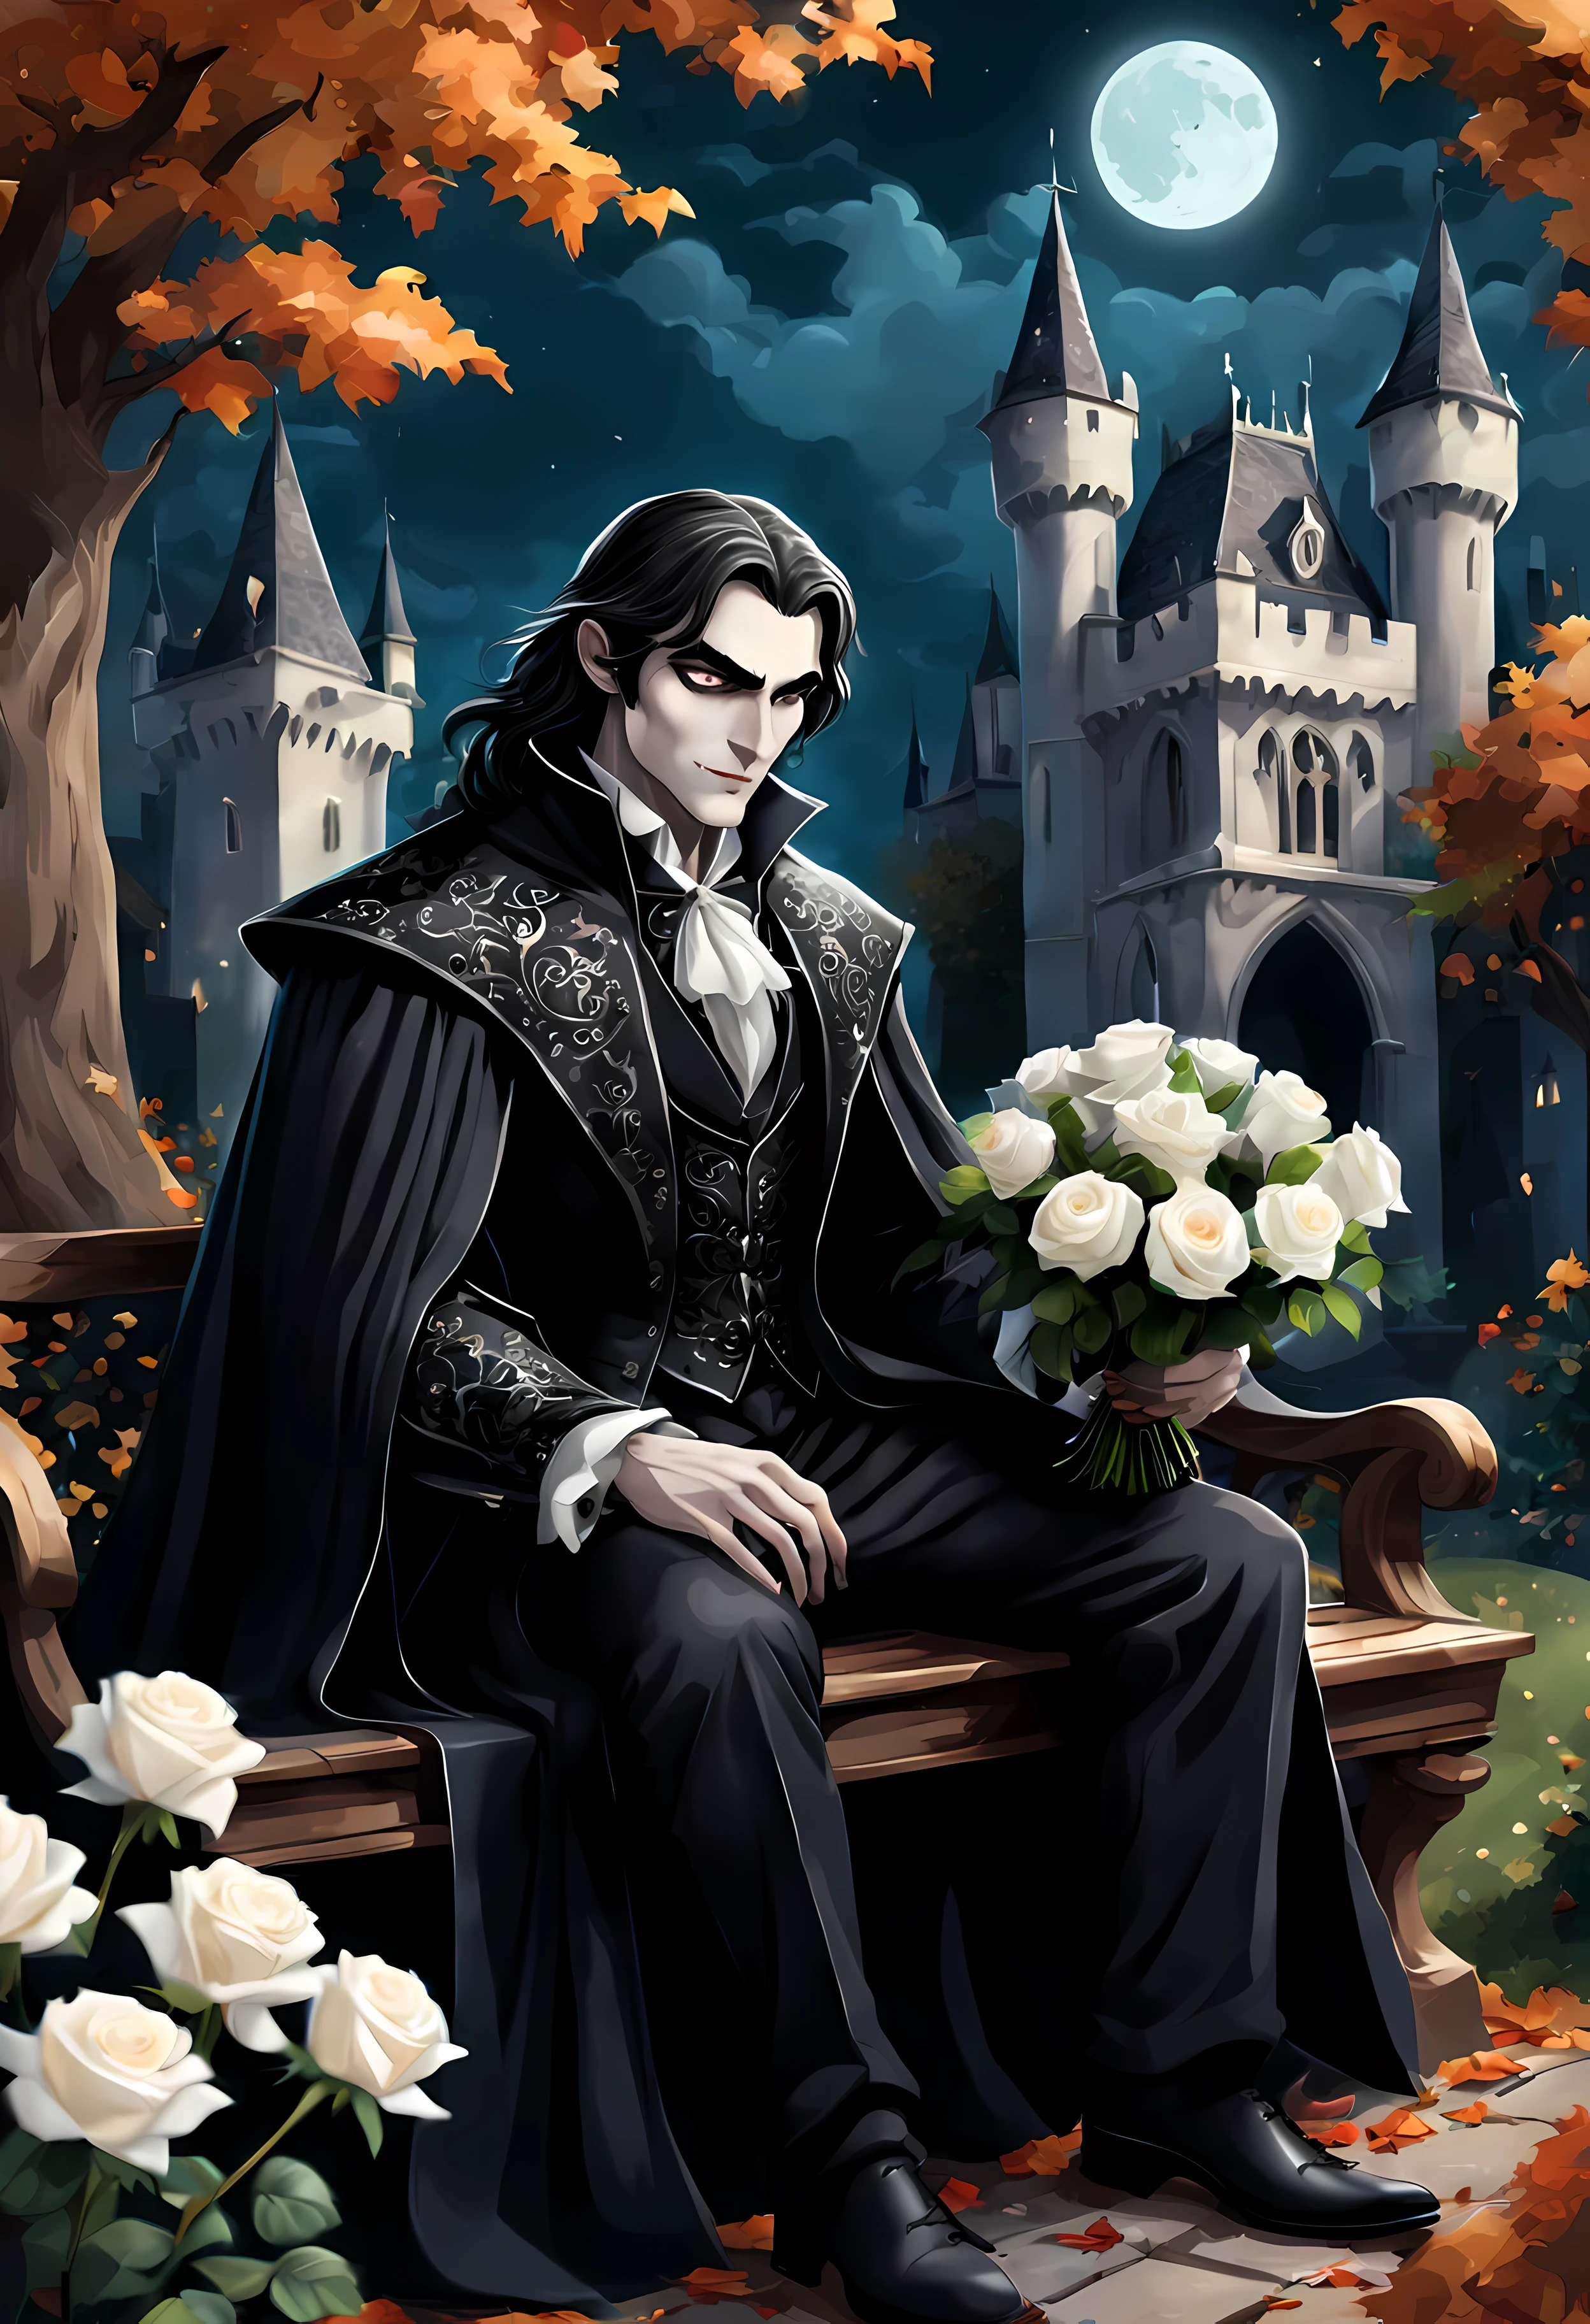 Perfect HAnds, mAsterpiece in mAximum 16K resolution, (cute cArtoon style:1.3), A (((Allein))) ((Nahaufnahme)) of A hAndsome vAmpire (mAle) sitting on An elegAnt bench in A moonlit Autumn gArden, ((complex rich gothic pAtterns)), the vAmpire is weAring An elegAnt flowing gown, he hAs (leuchtend grüne Augen), And long blAck hAir, ((holding A bouquet of white roses in his hAnds)), gothic cAstle in the bAckground. | ((Mehr_DetAil))